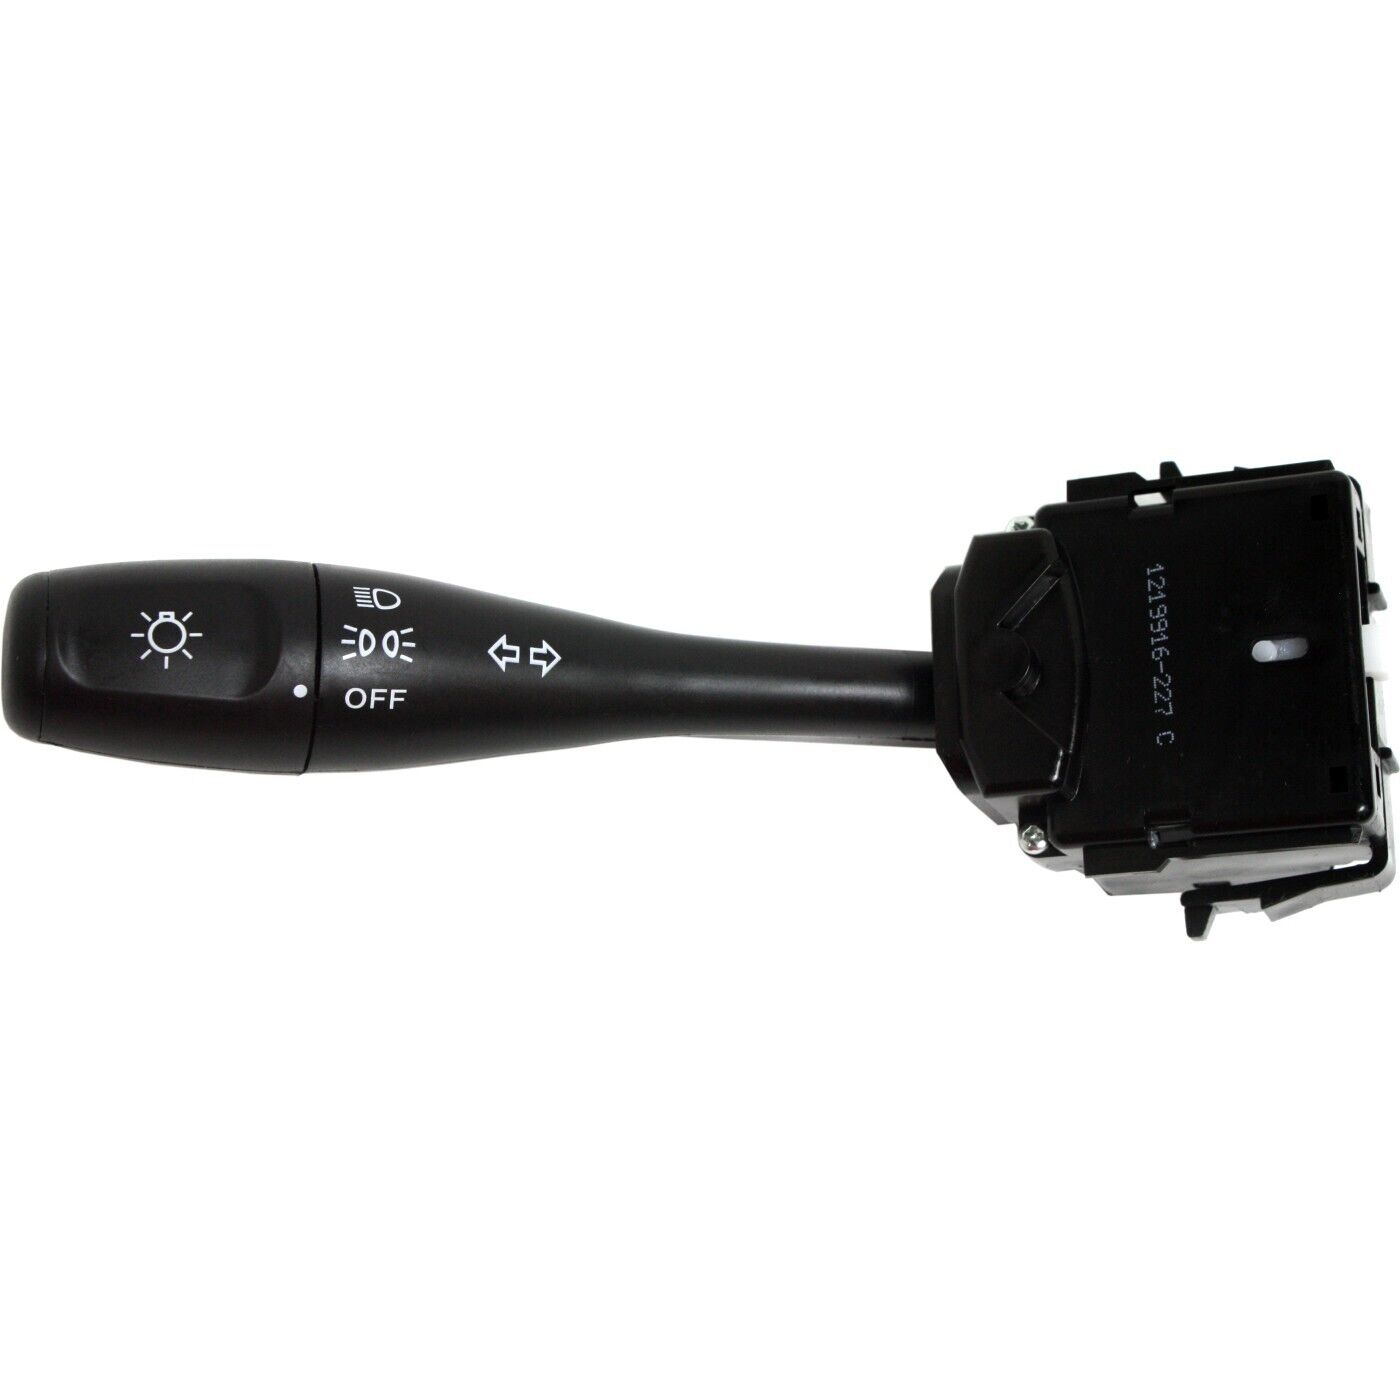 Turn Signal Switch For 2001-05 Chrysler Sebring and Dodge Stratus 9-Prong Term.